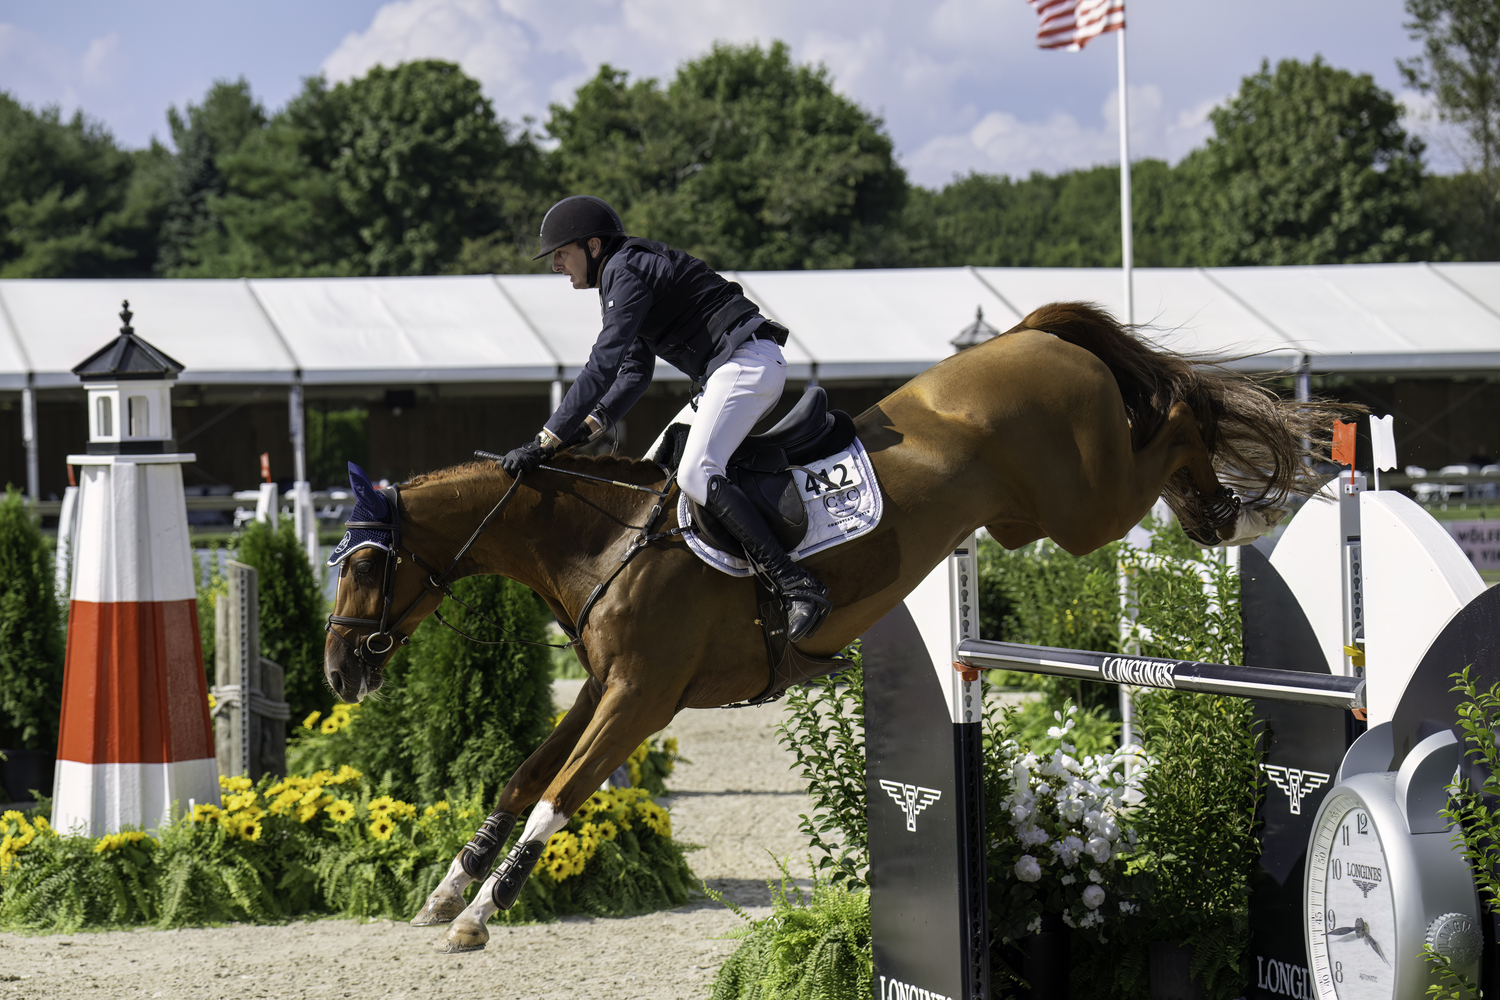 Irish rider Christian Coyle and his mount Ma Pomme de Tamerville won the $30,000 Hampton Classic Jumper Challenge, the first open jumper class of the week, in the Grand Prix ring on Sunday. MARIANNE BARNETT